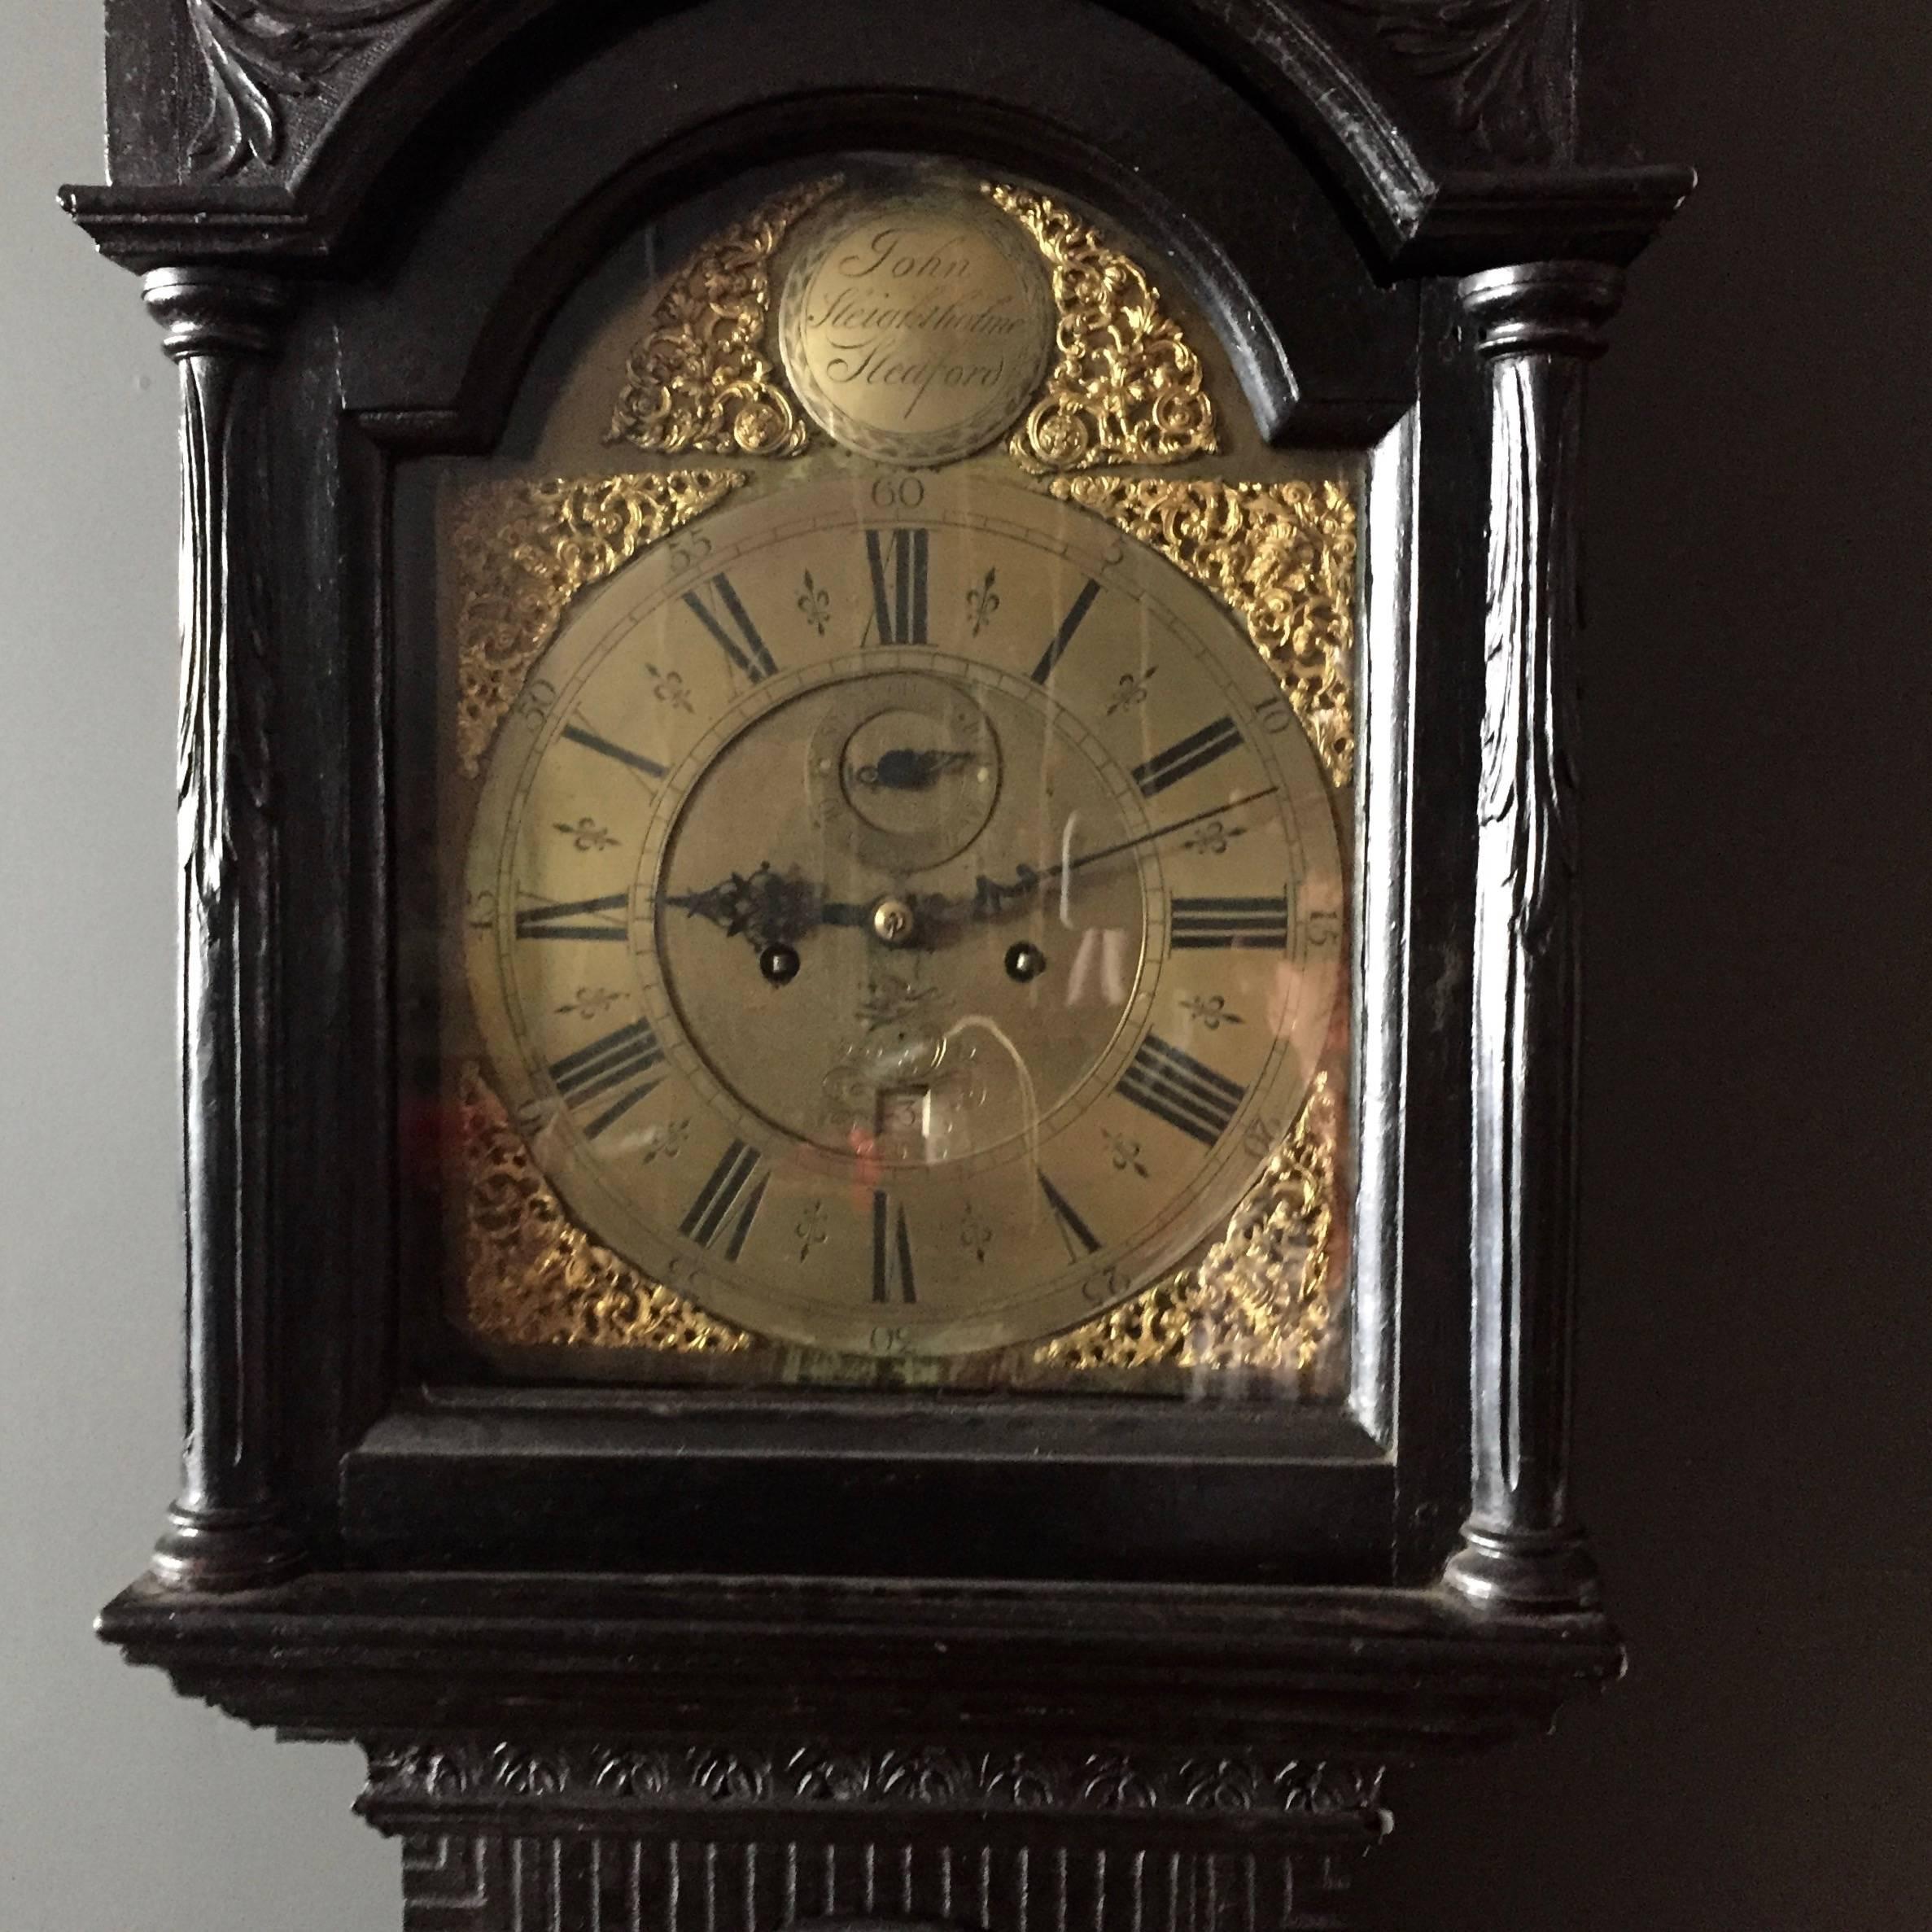 Queen Anne Mid-18th Century English Black Polished Ornately Carved Tall Case Clock